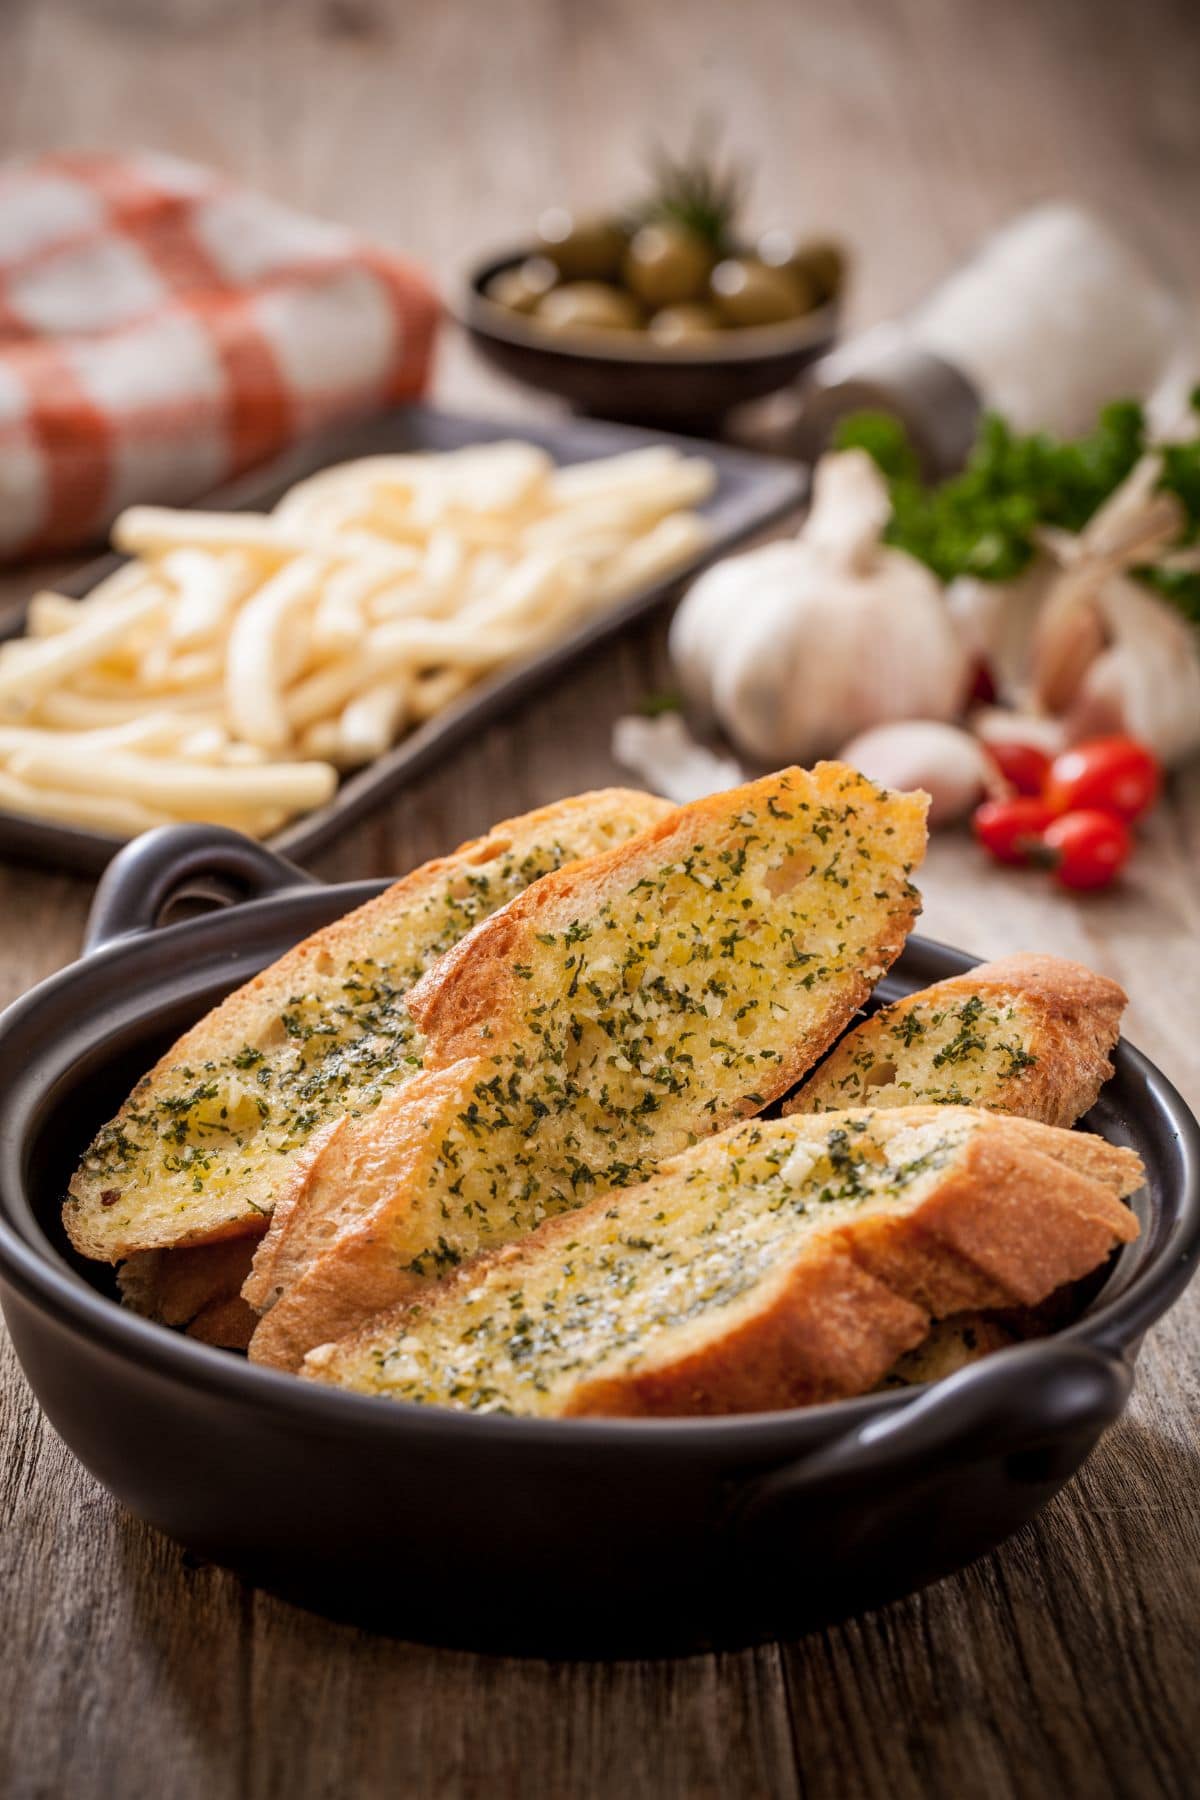 Toasted garlic bread in a bowl for serving.